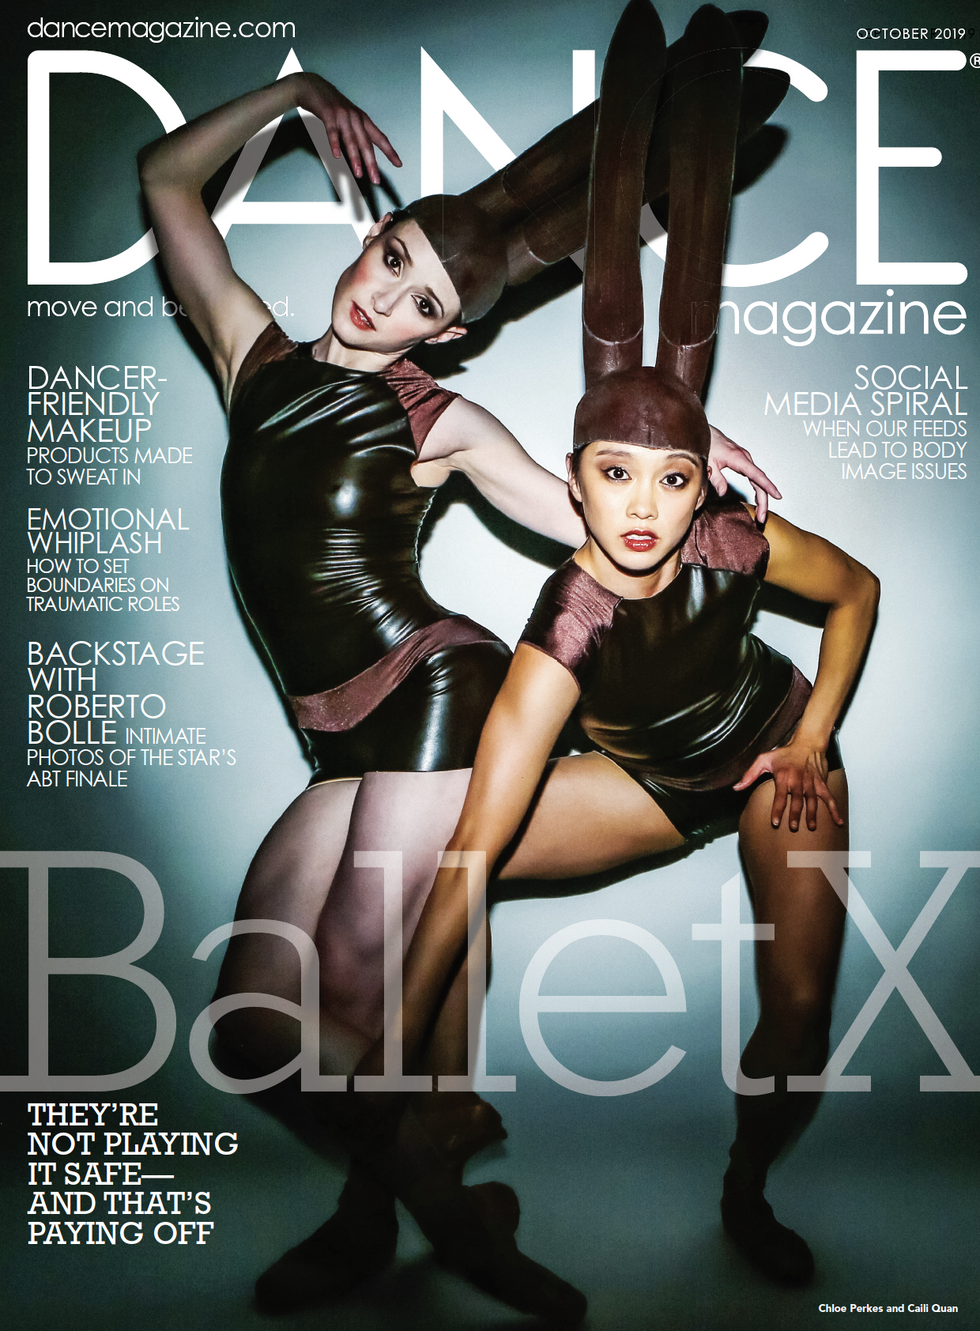 Cover image of two dancers in bunny ears